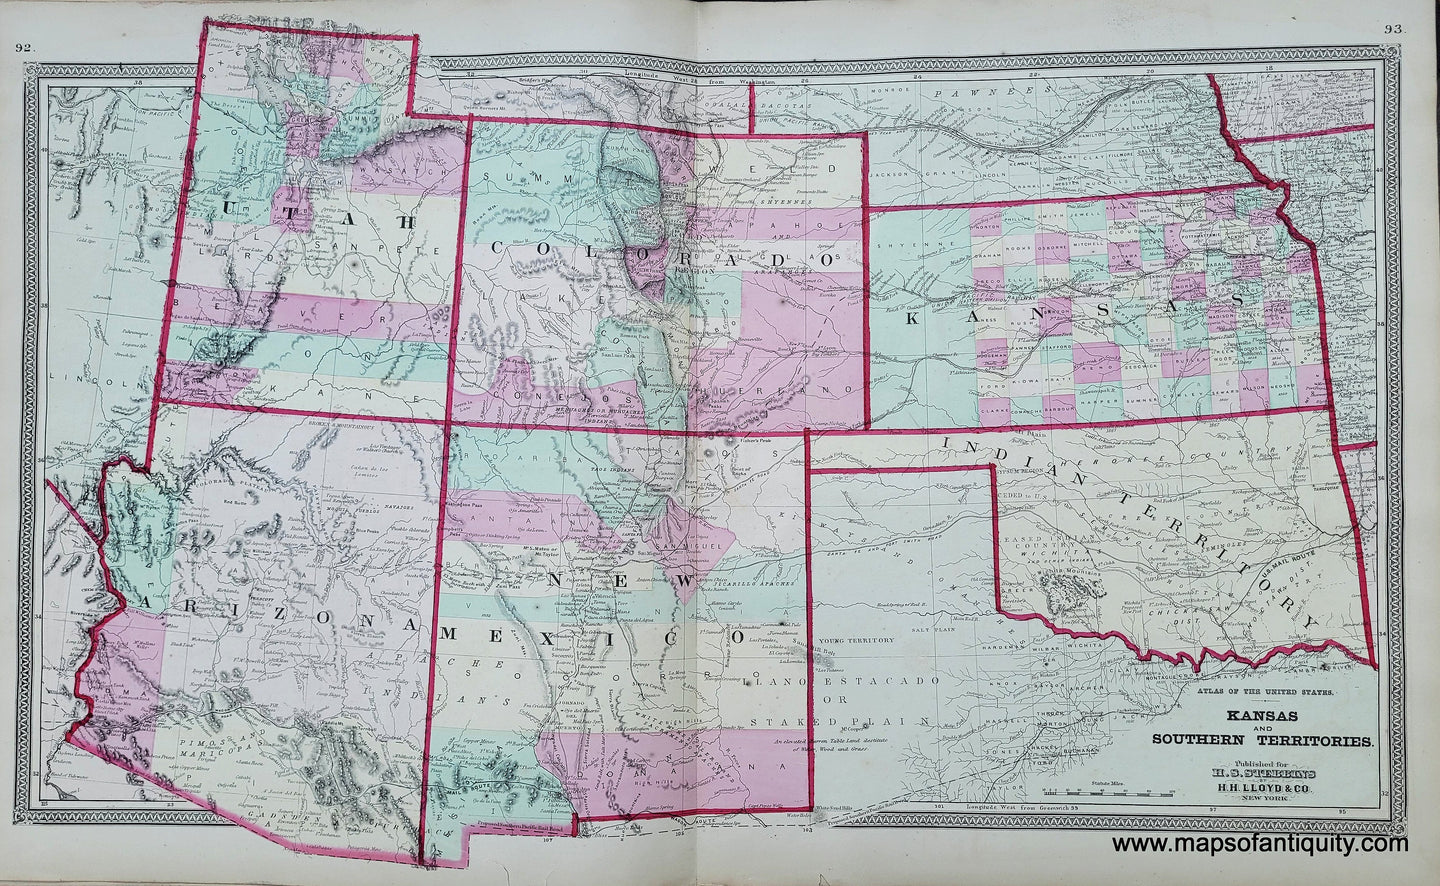 Genuine-Antique-Hand-colored-Map-Kansas-and-Southern-Territories-1868-Stebbins-Lloyd-Maps-Of-Antiquity